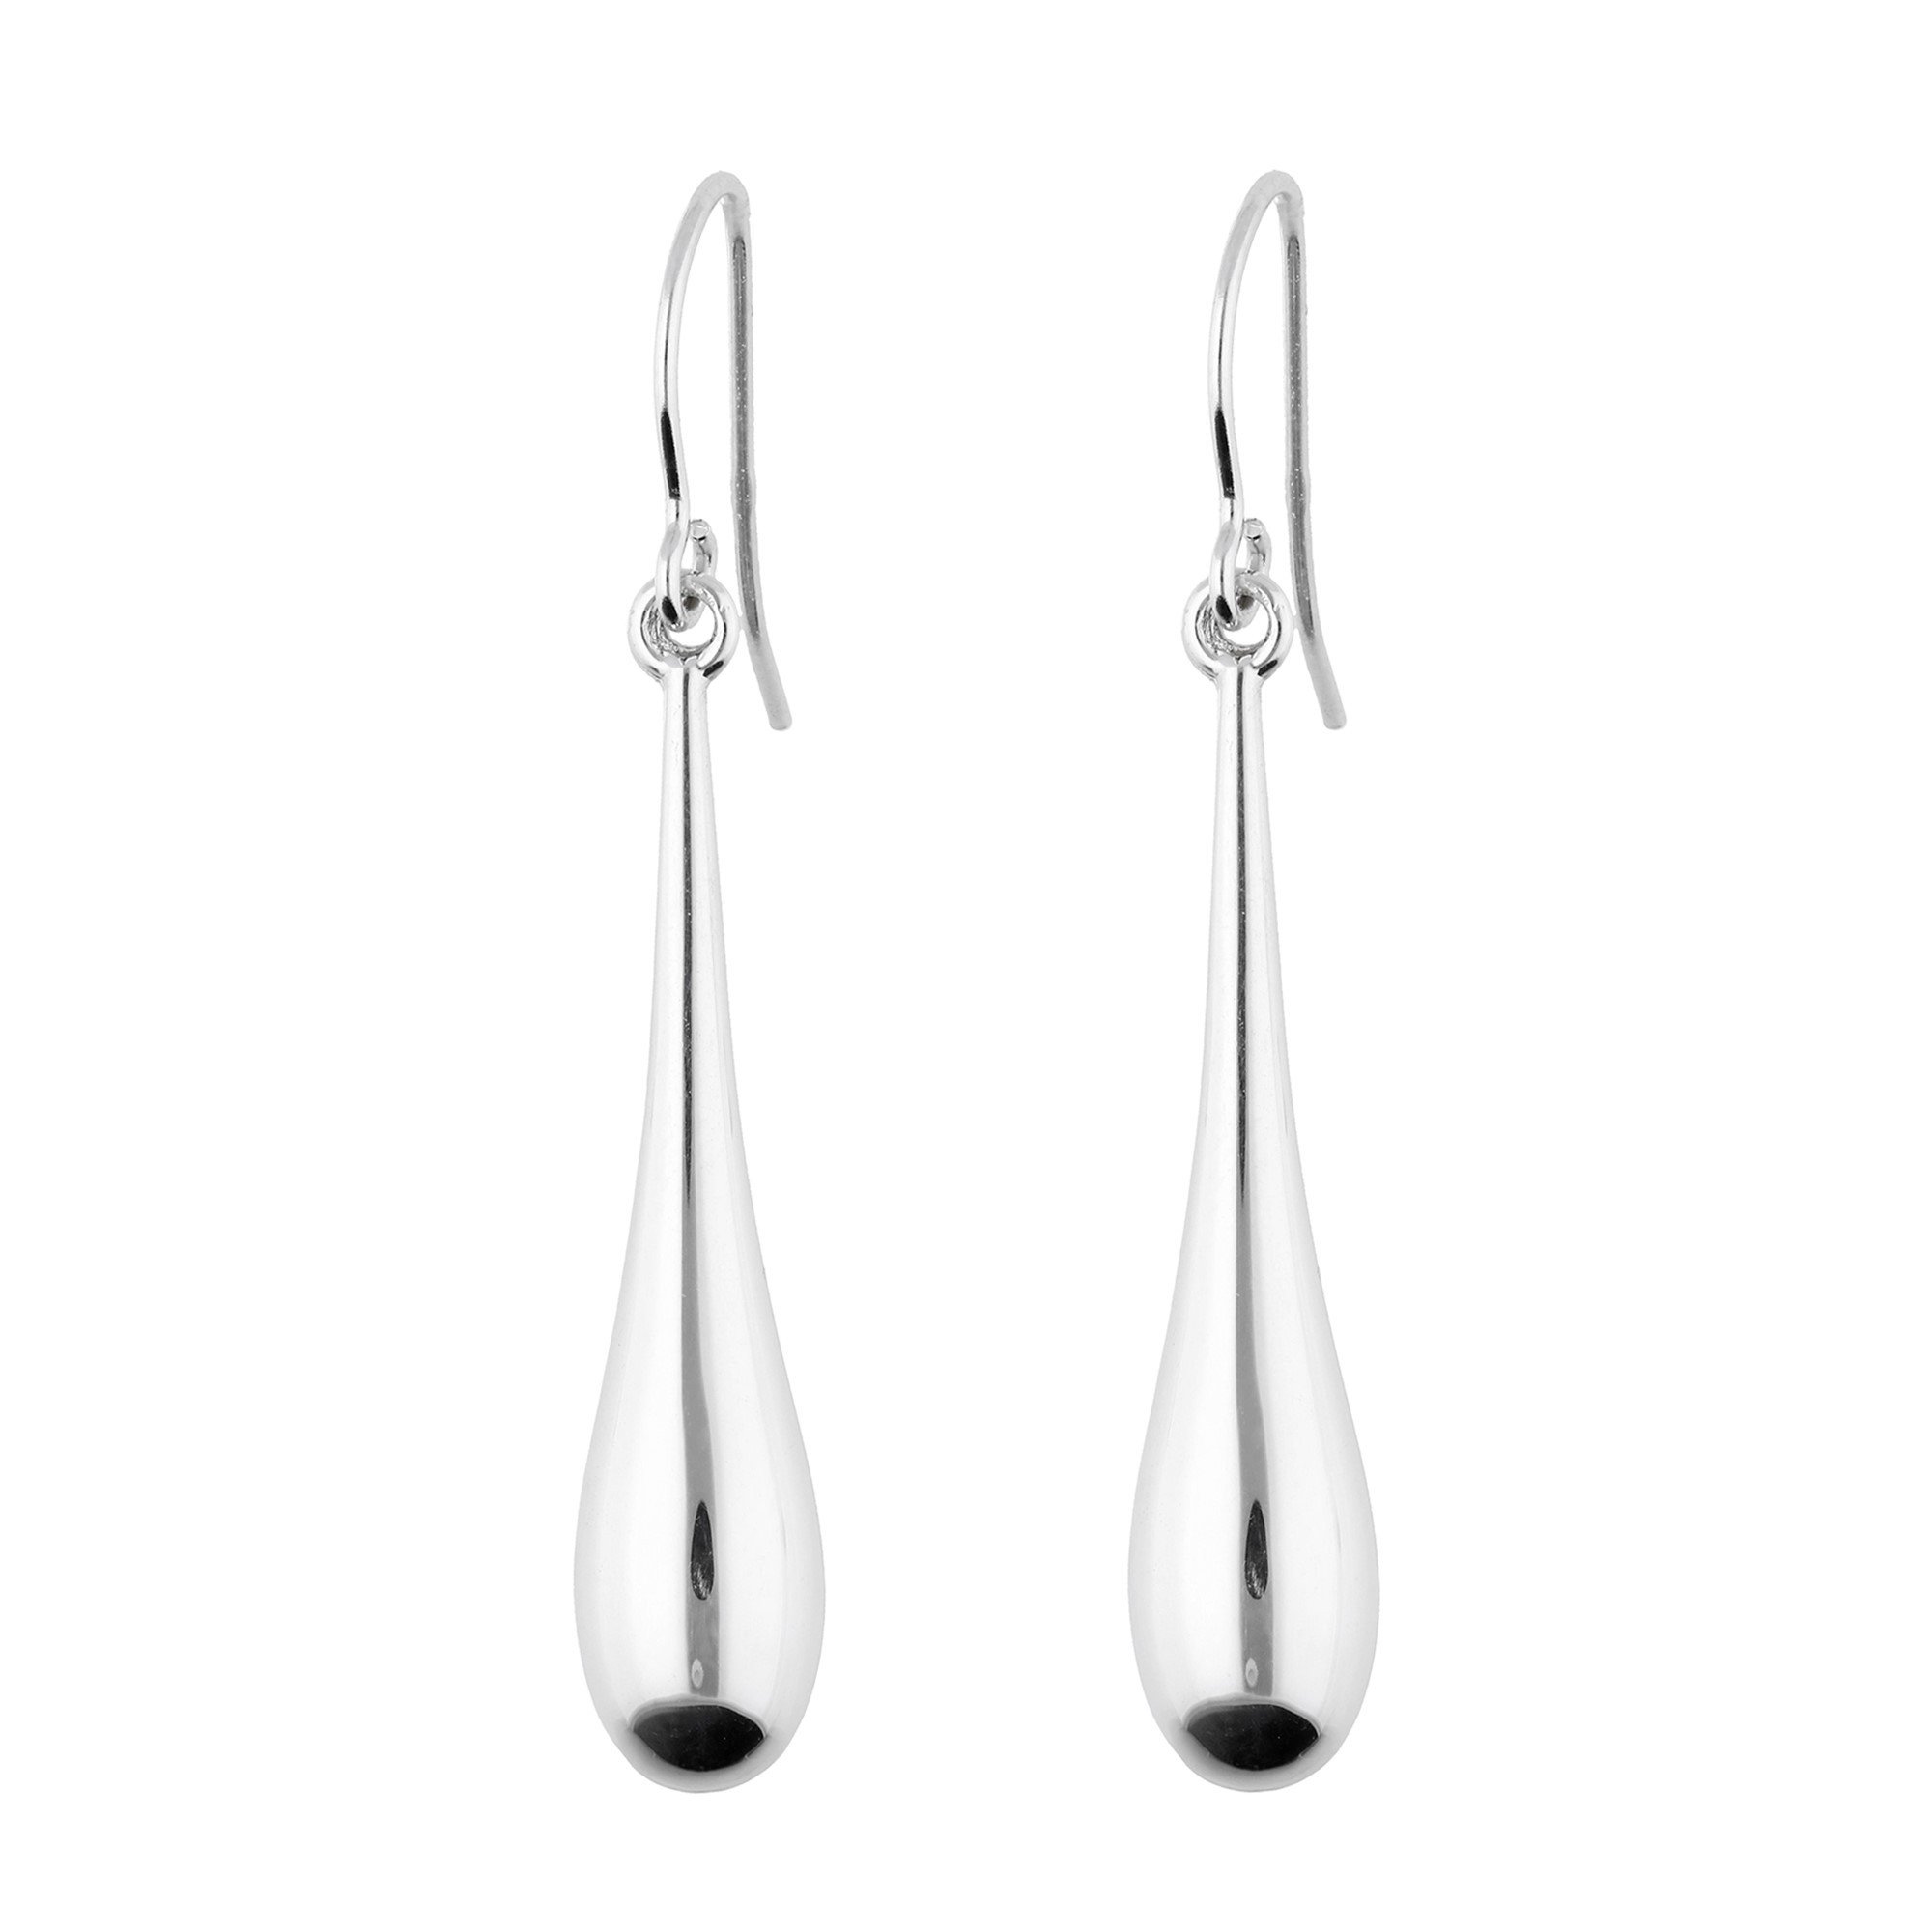 9ct White Gold Long Drop Earrings | Buy Online | Free Insured UK Delivery